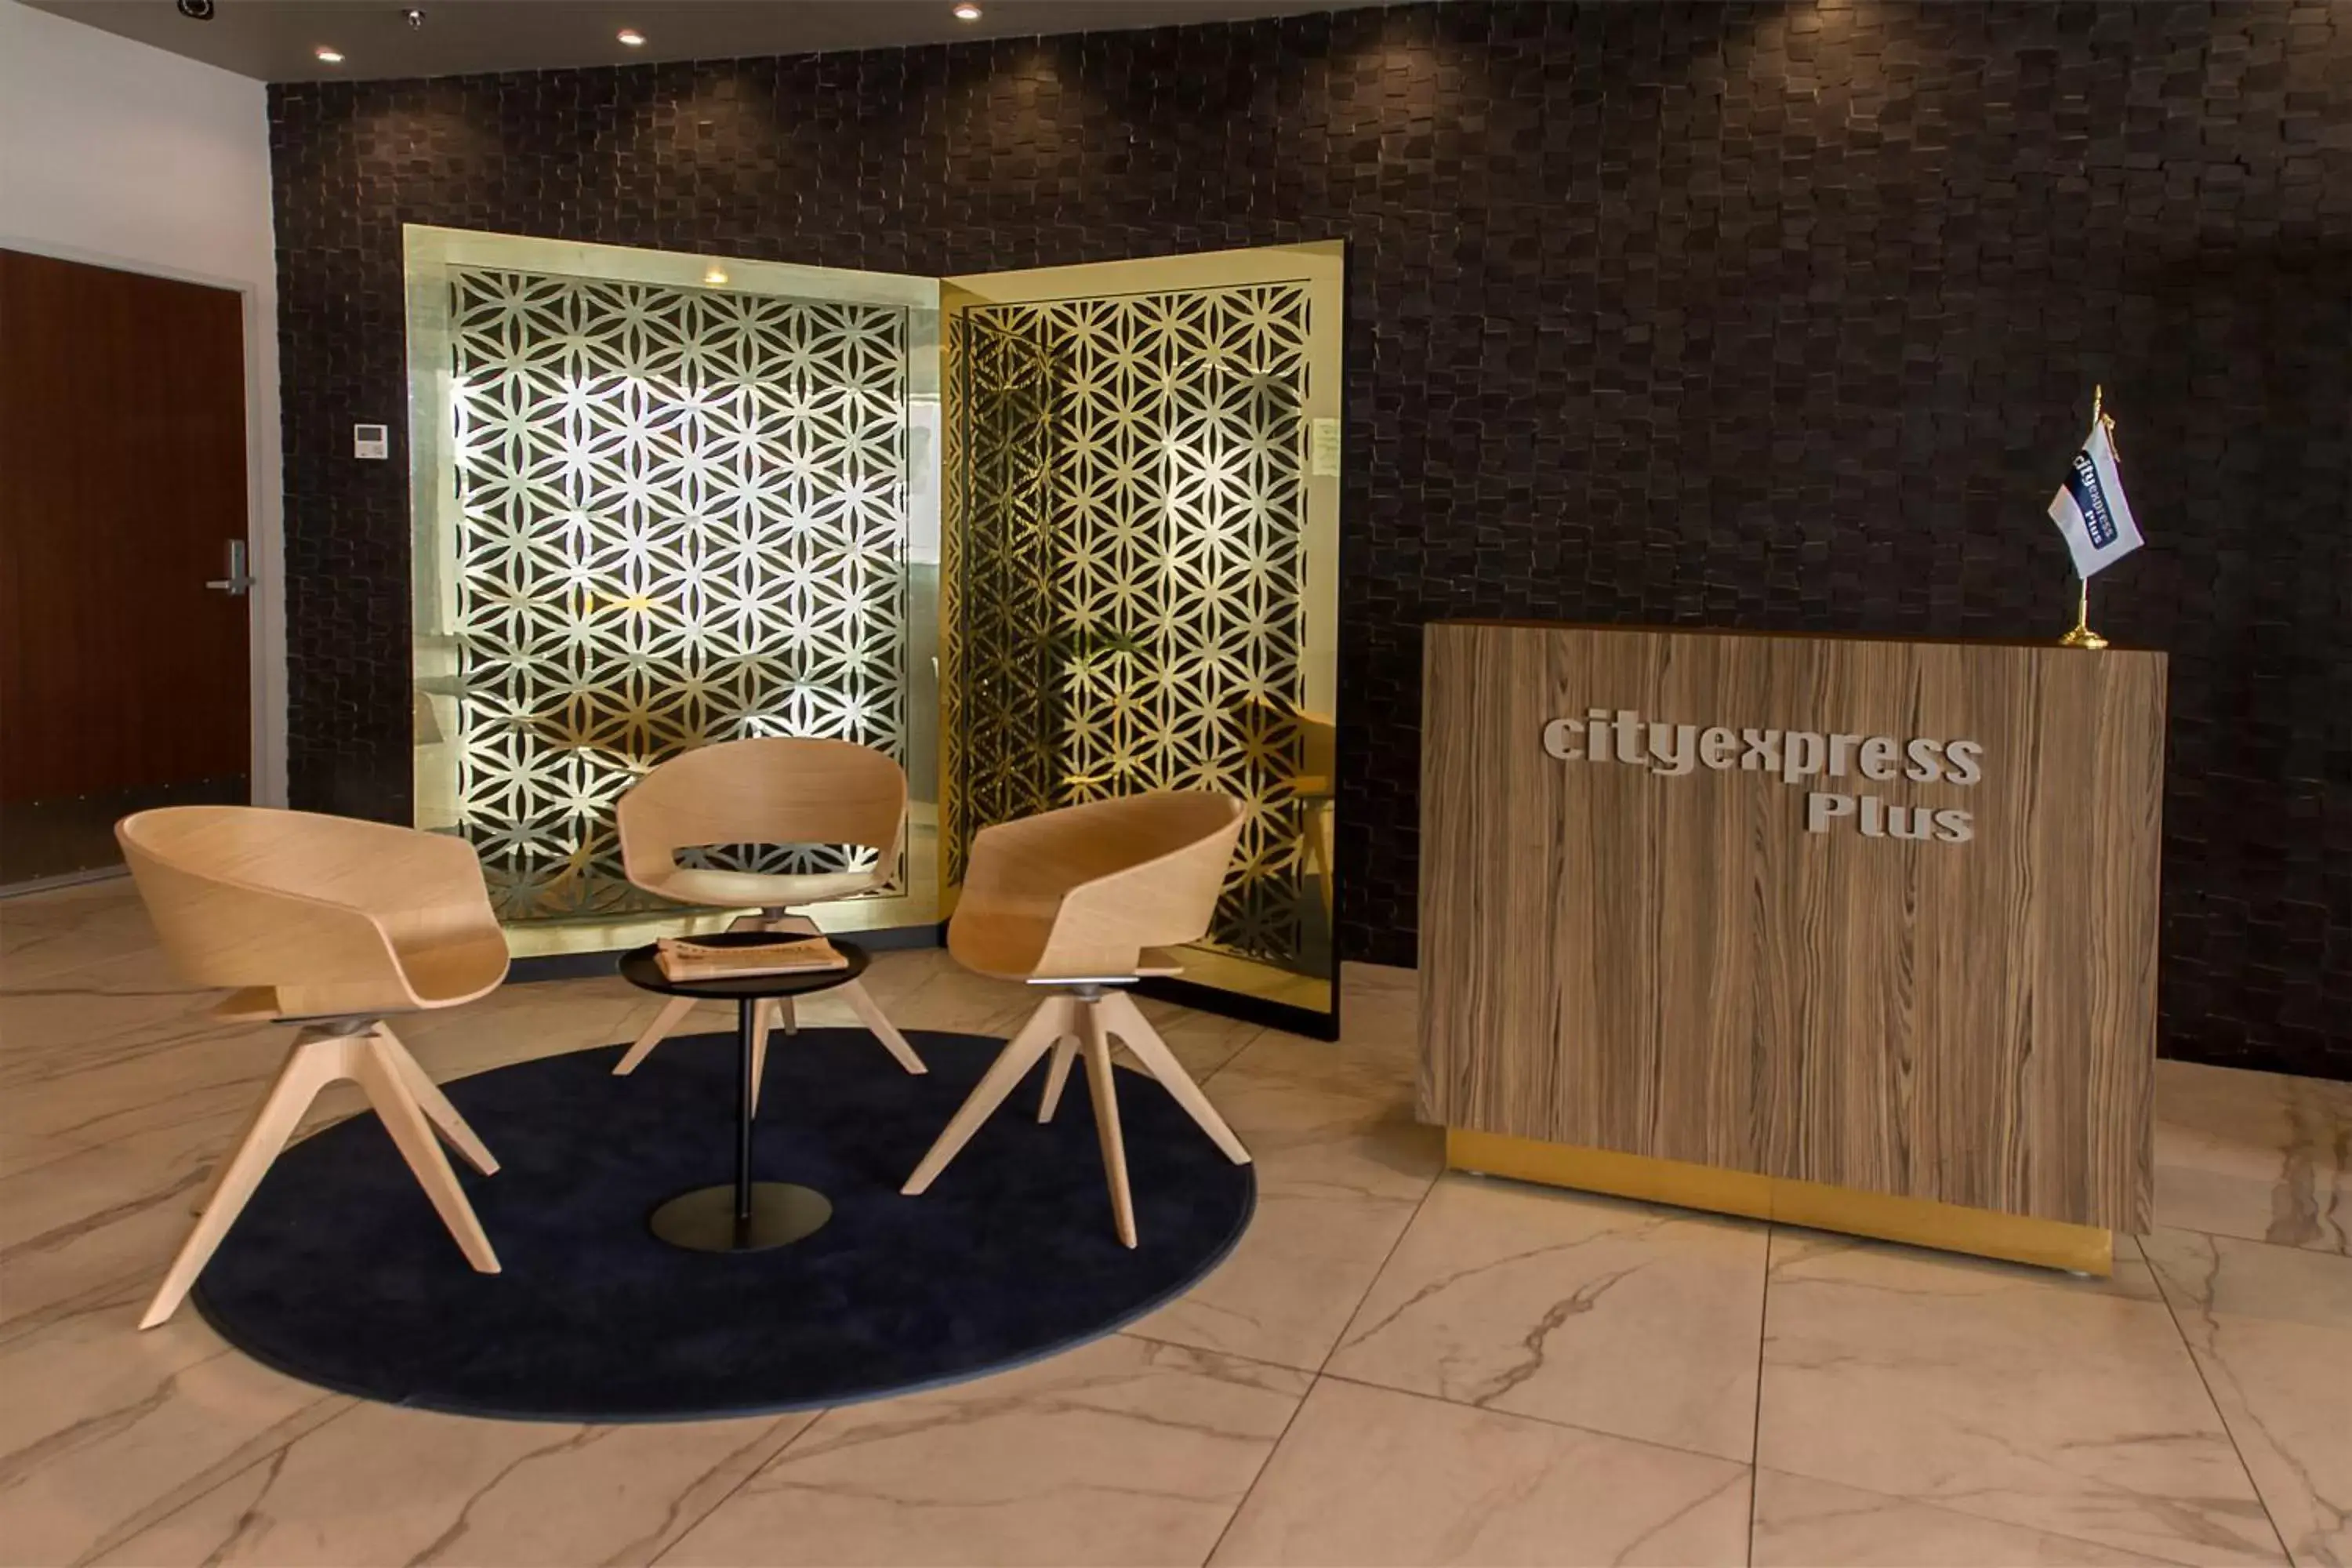 Area and facilities in City Express Plus by Marriott Mundo E